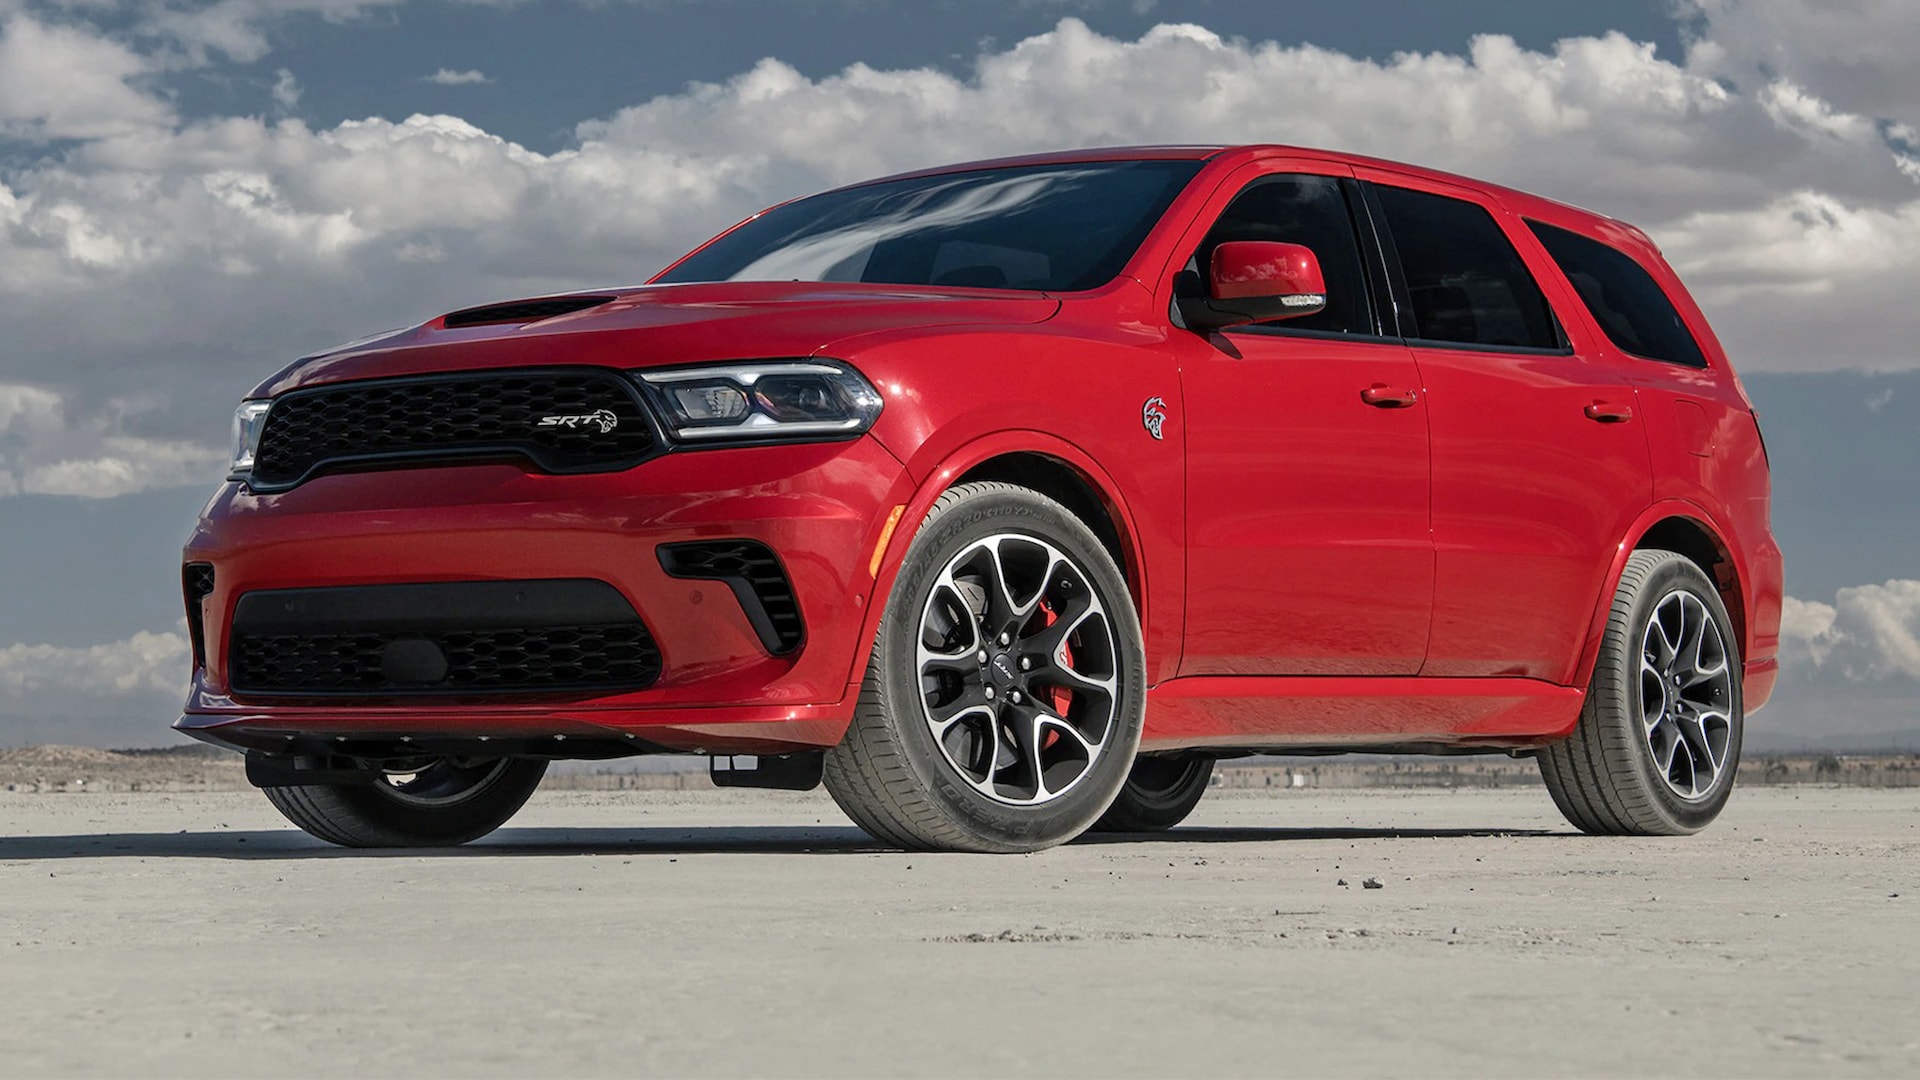 2023 Dodge Durango Prices, Reviews, and Photos - MotorTrend